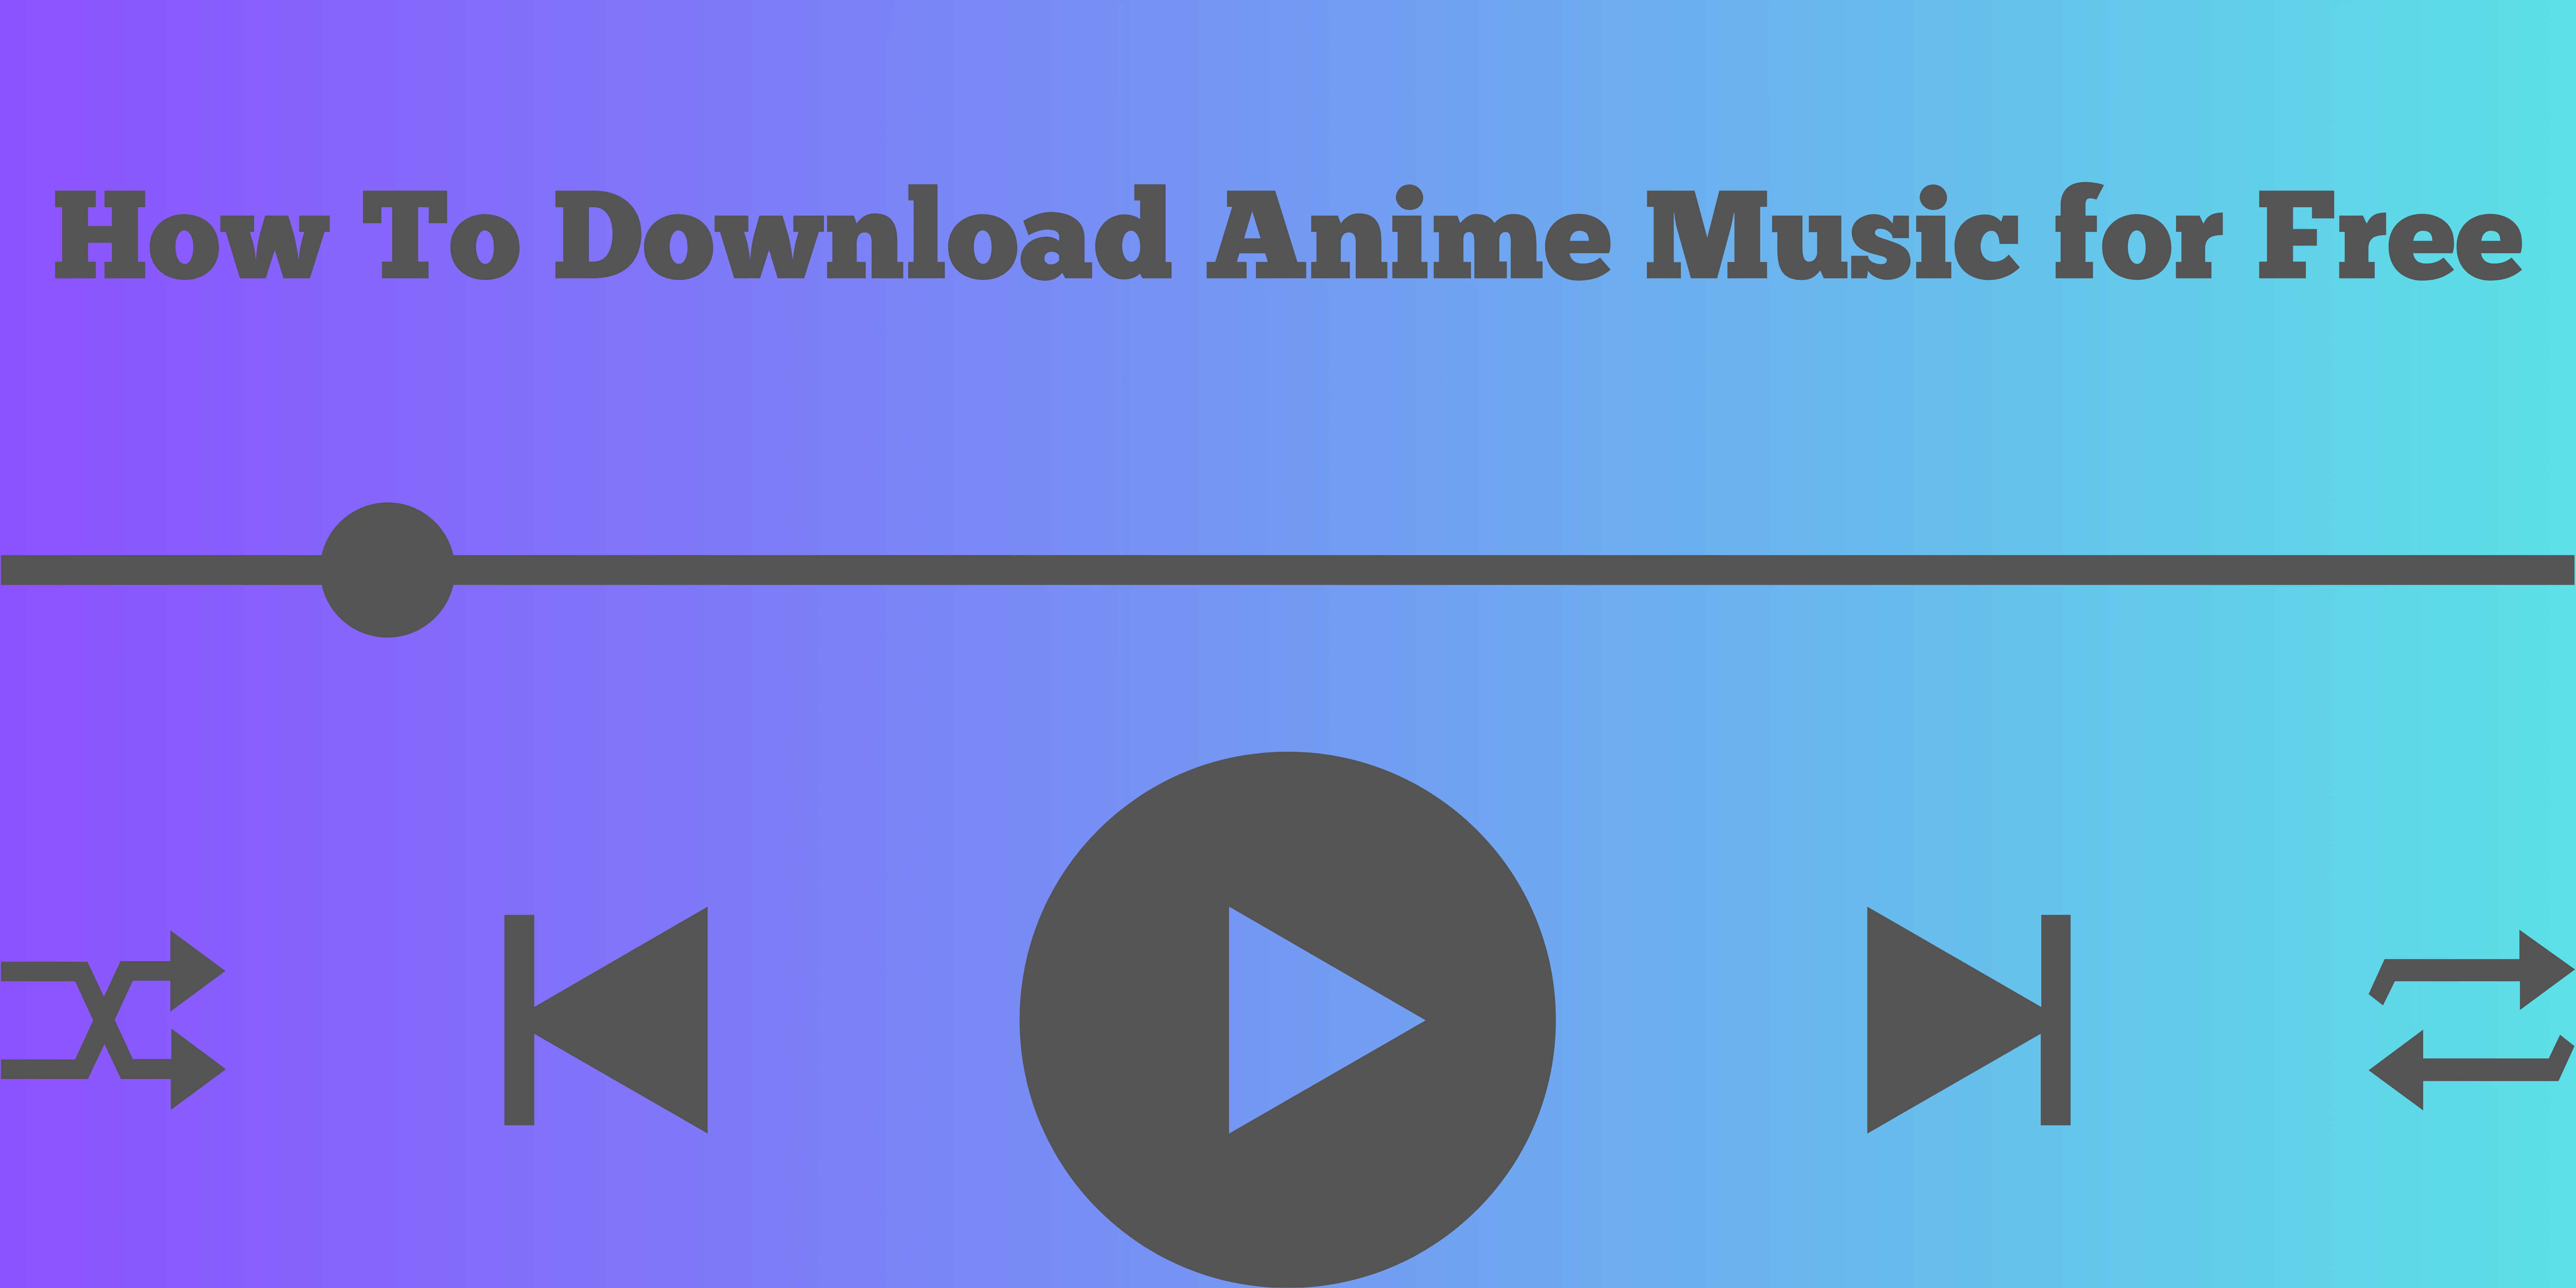 How to download anime music for free